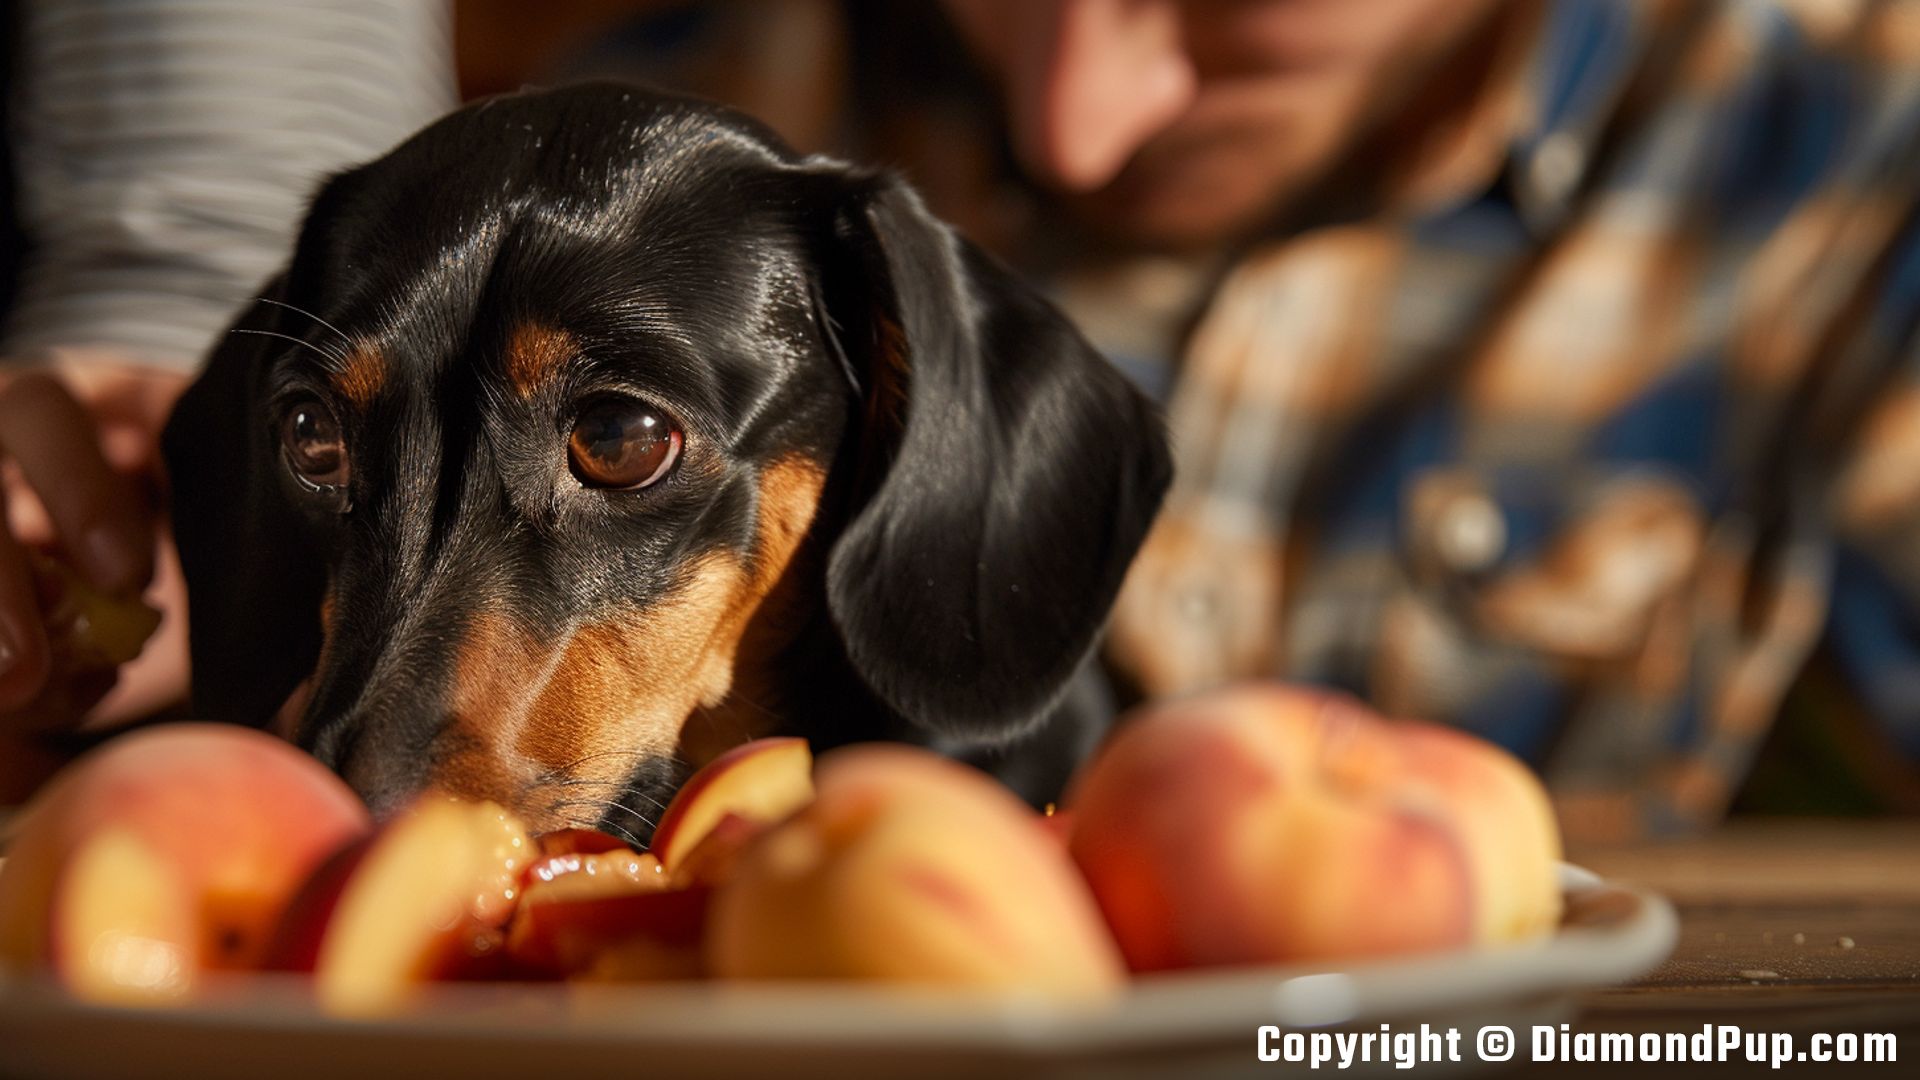 Image of an Adorable Dachshund Snacking on Peaches